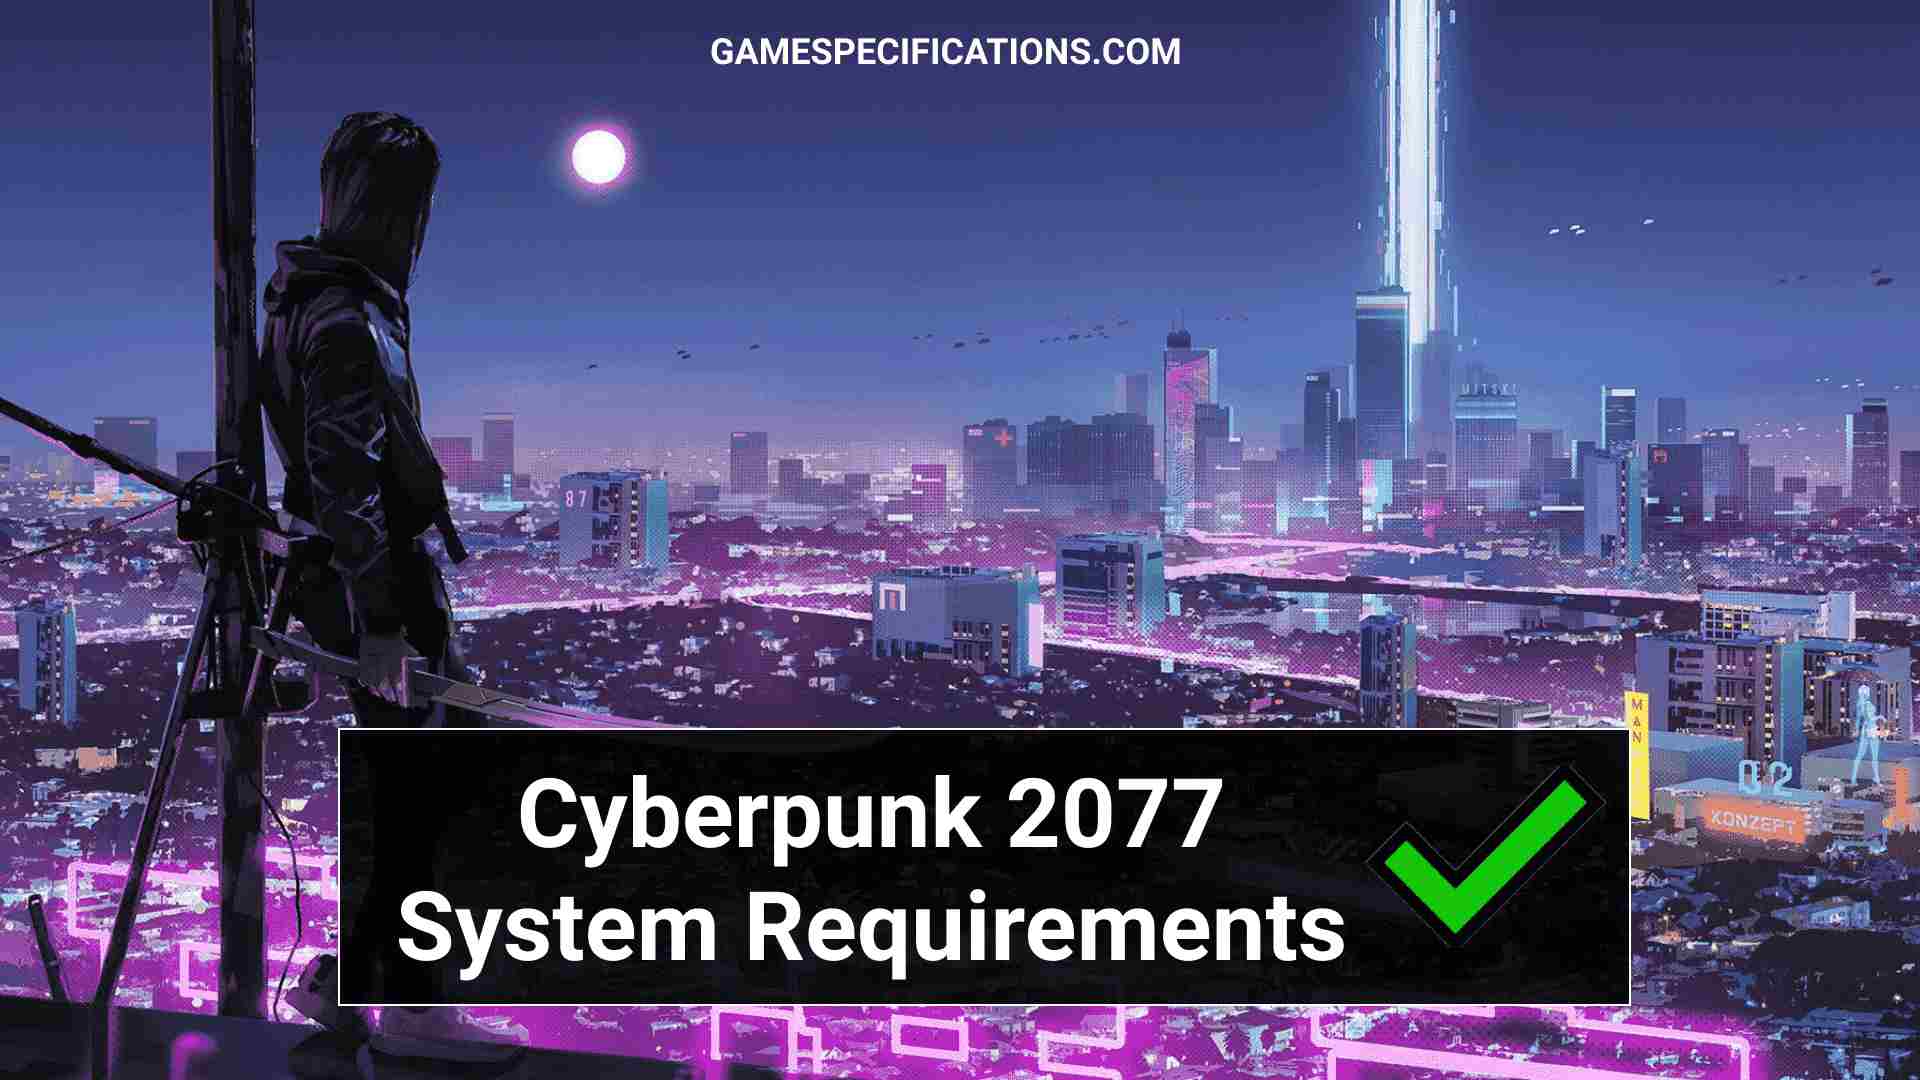 Cyberpunk 2077 System Requirements To Run Awesome Sci-Fi Game